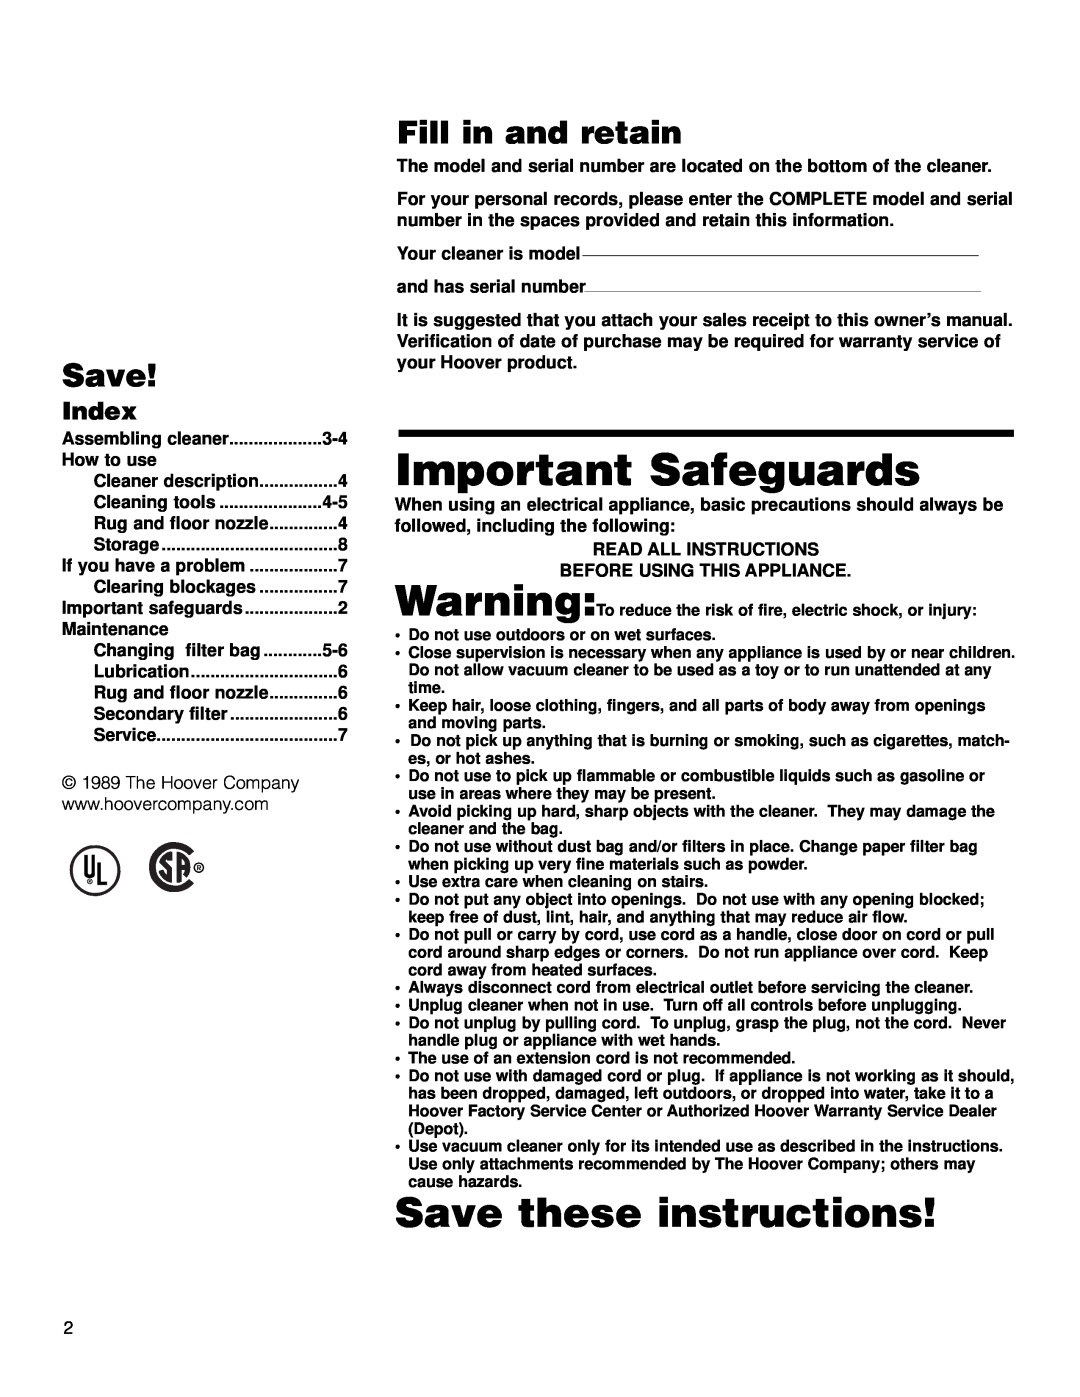 Hoover Compact Canister Cleaner owner manual Fill in and retain, Index, Important Safeguards, Save these instructions 